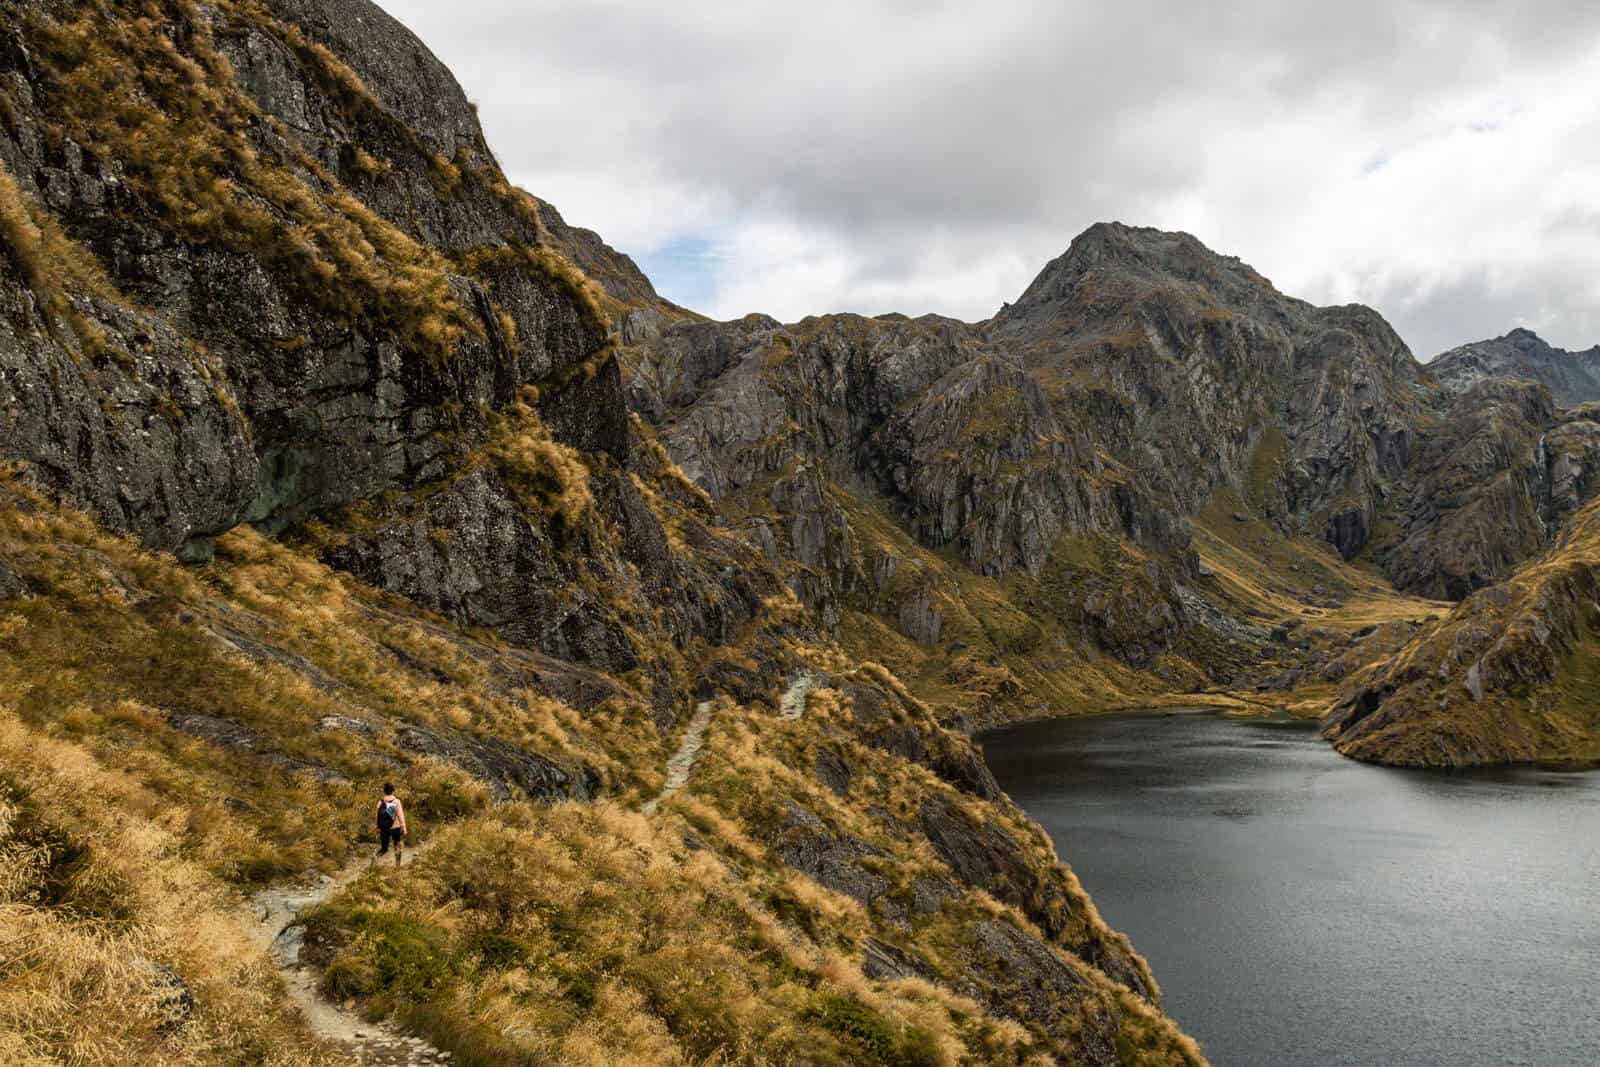 Guide to the Routeburn Track: Should You Do It as a Day Hike? (New Zealand)